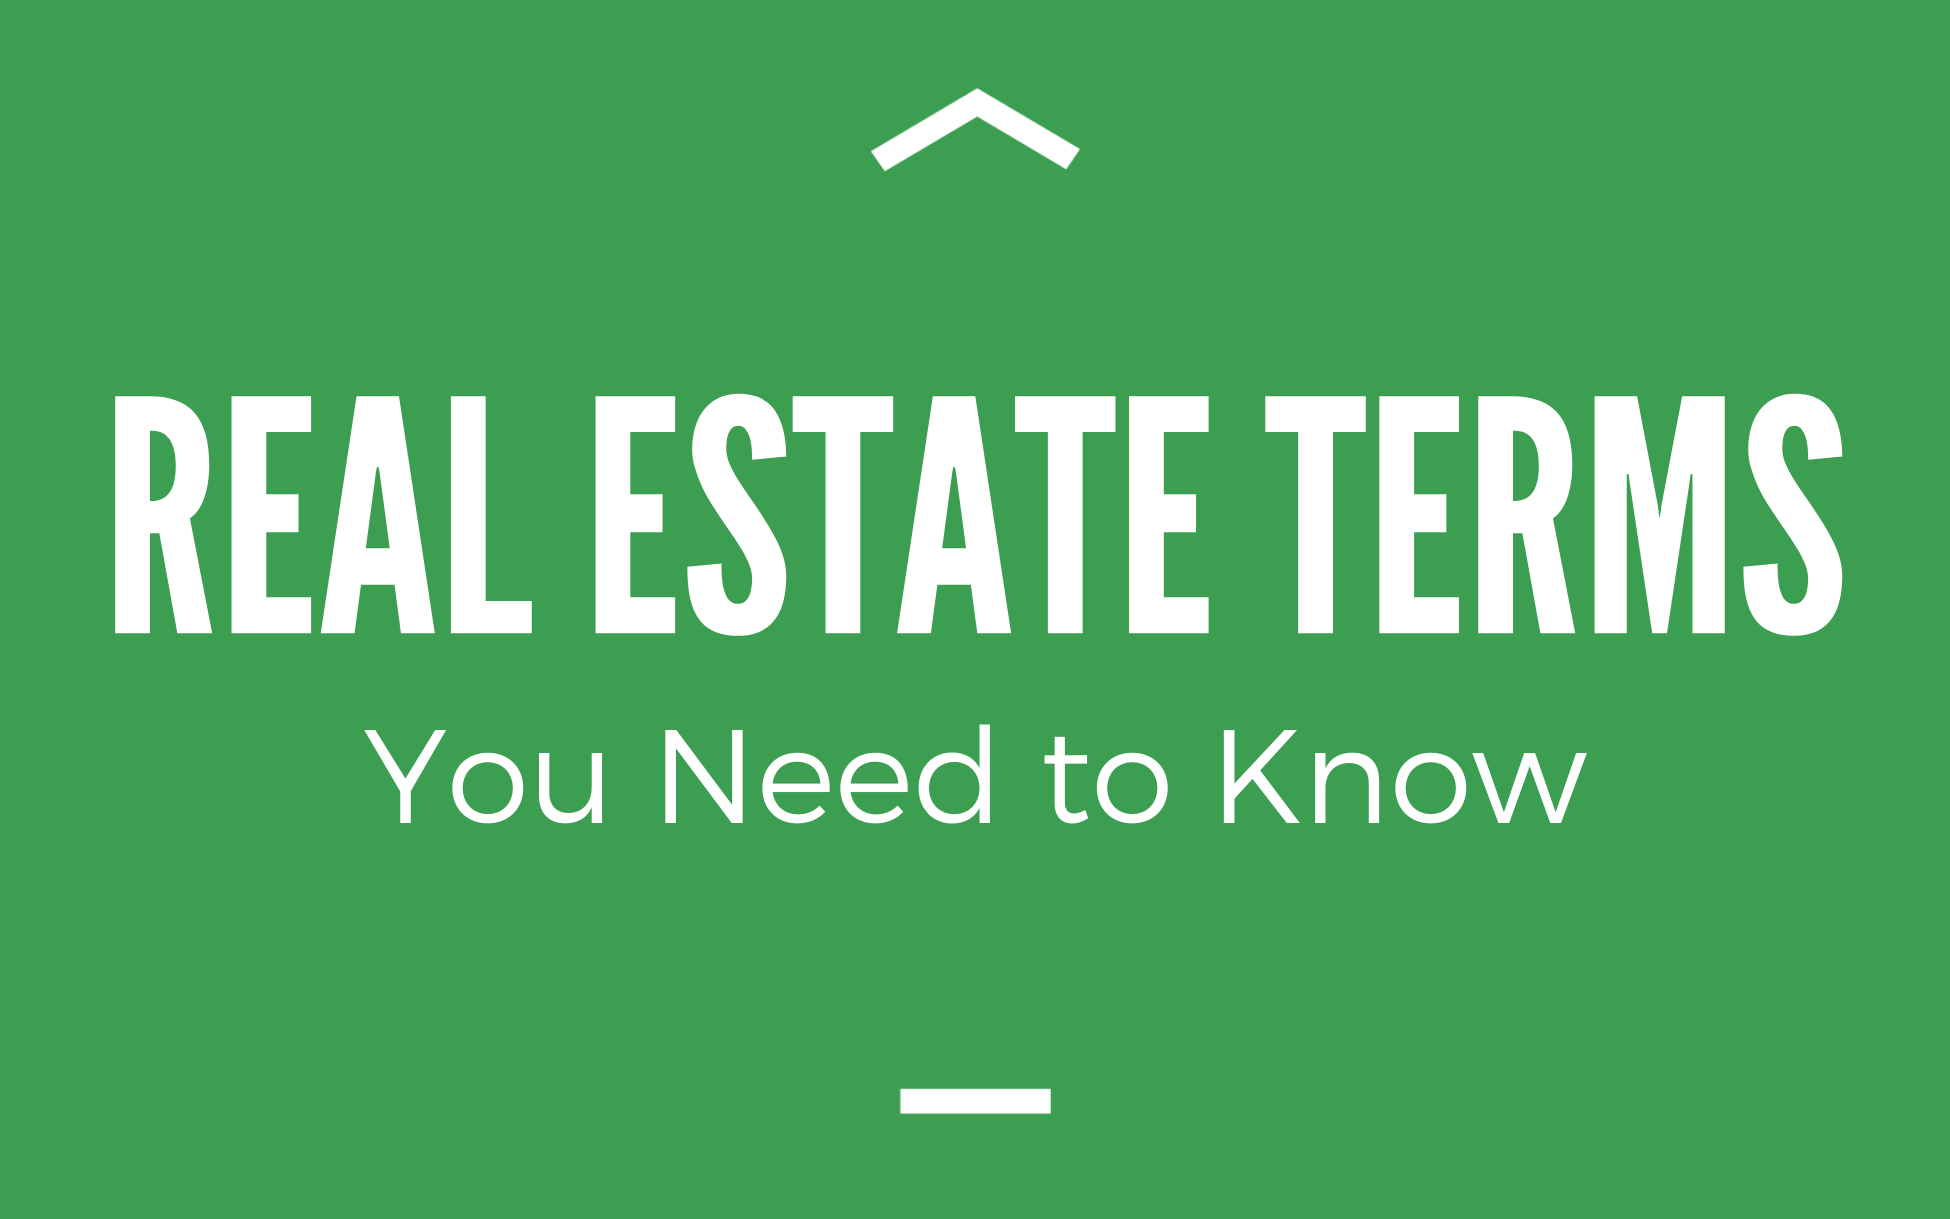 Real Estate Terms You Need to Know